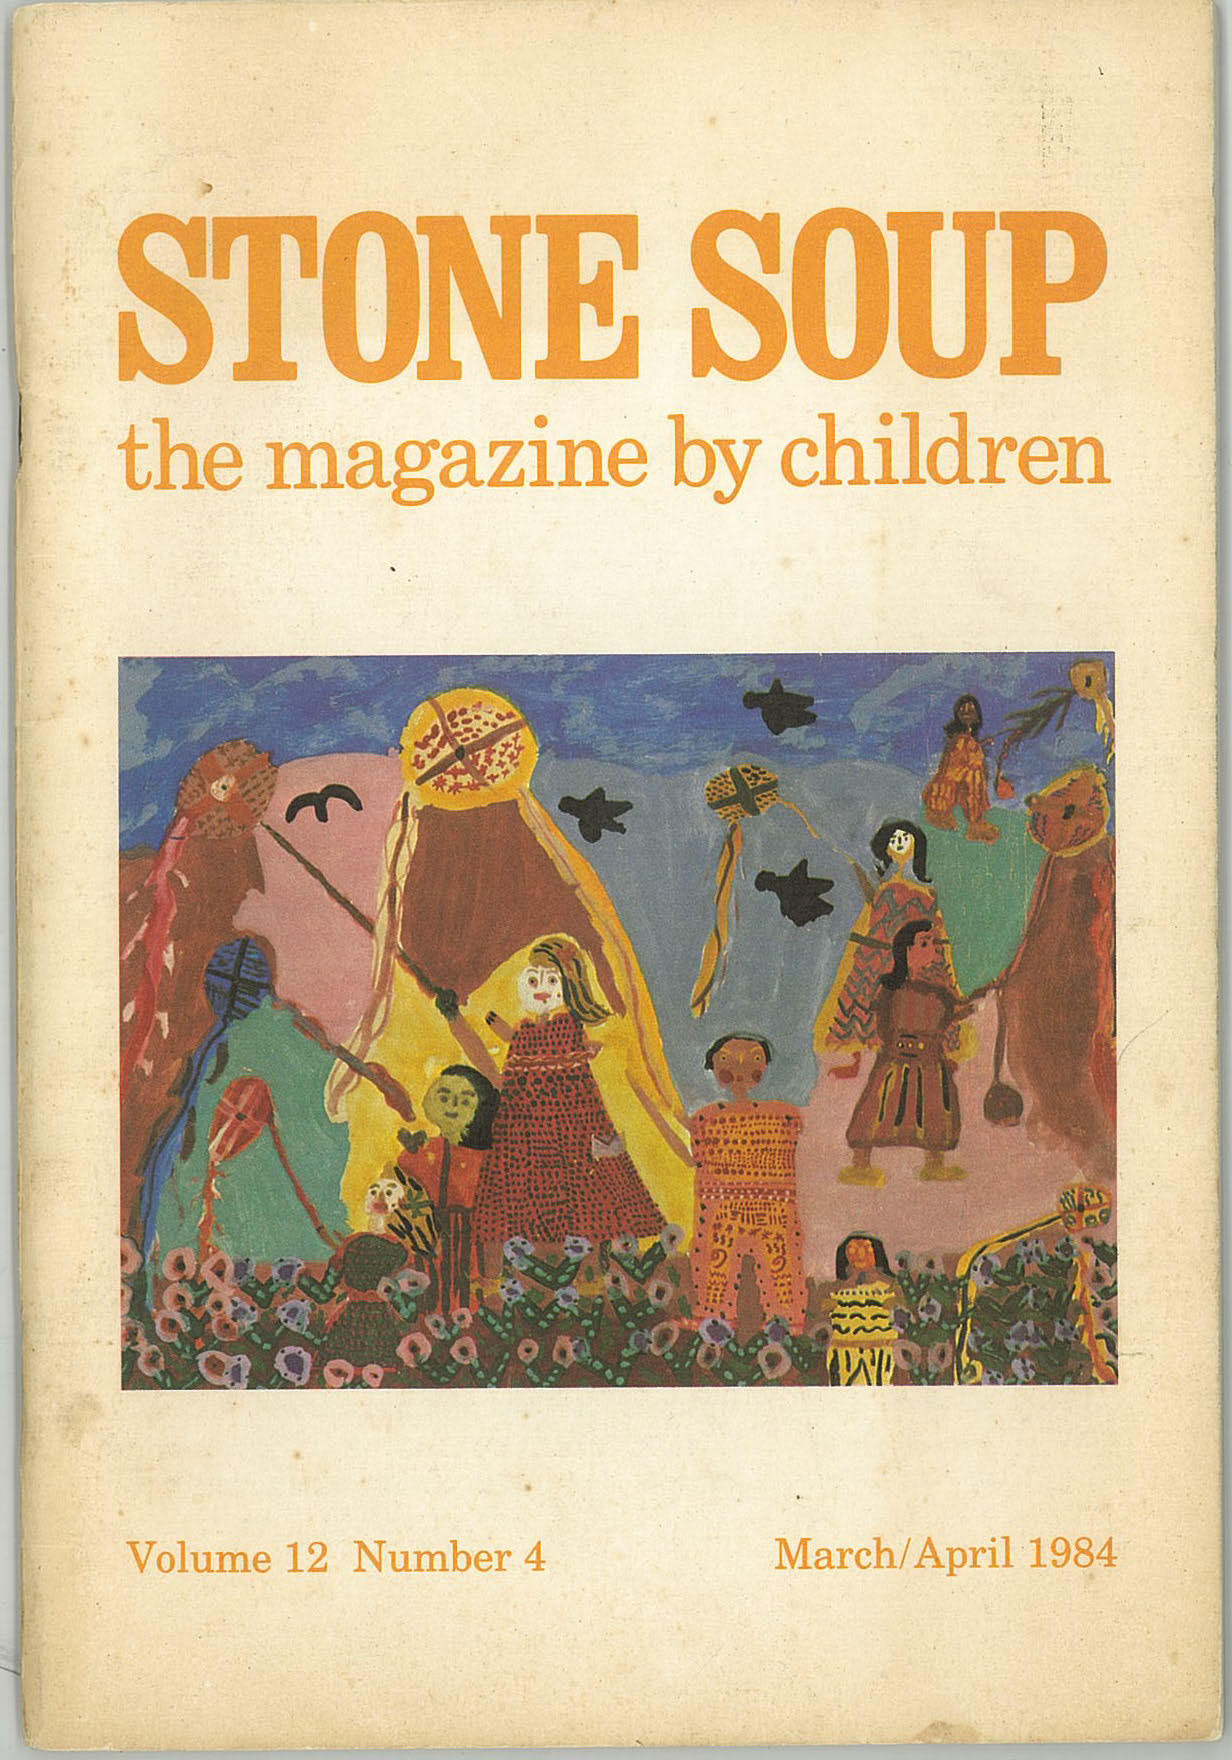 My poem in Stone Soup and its cover.